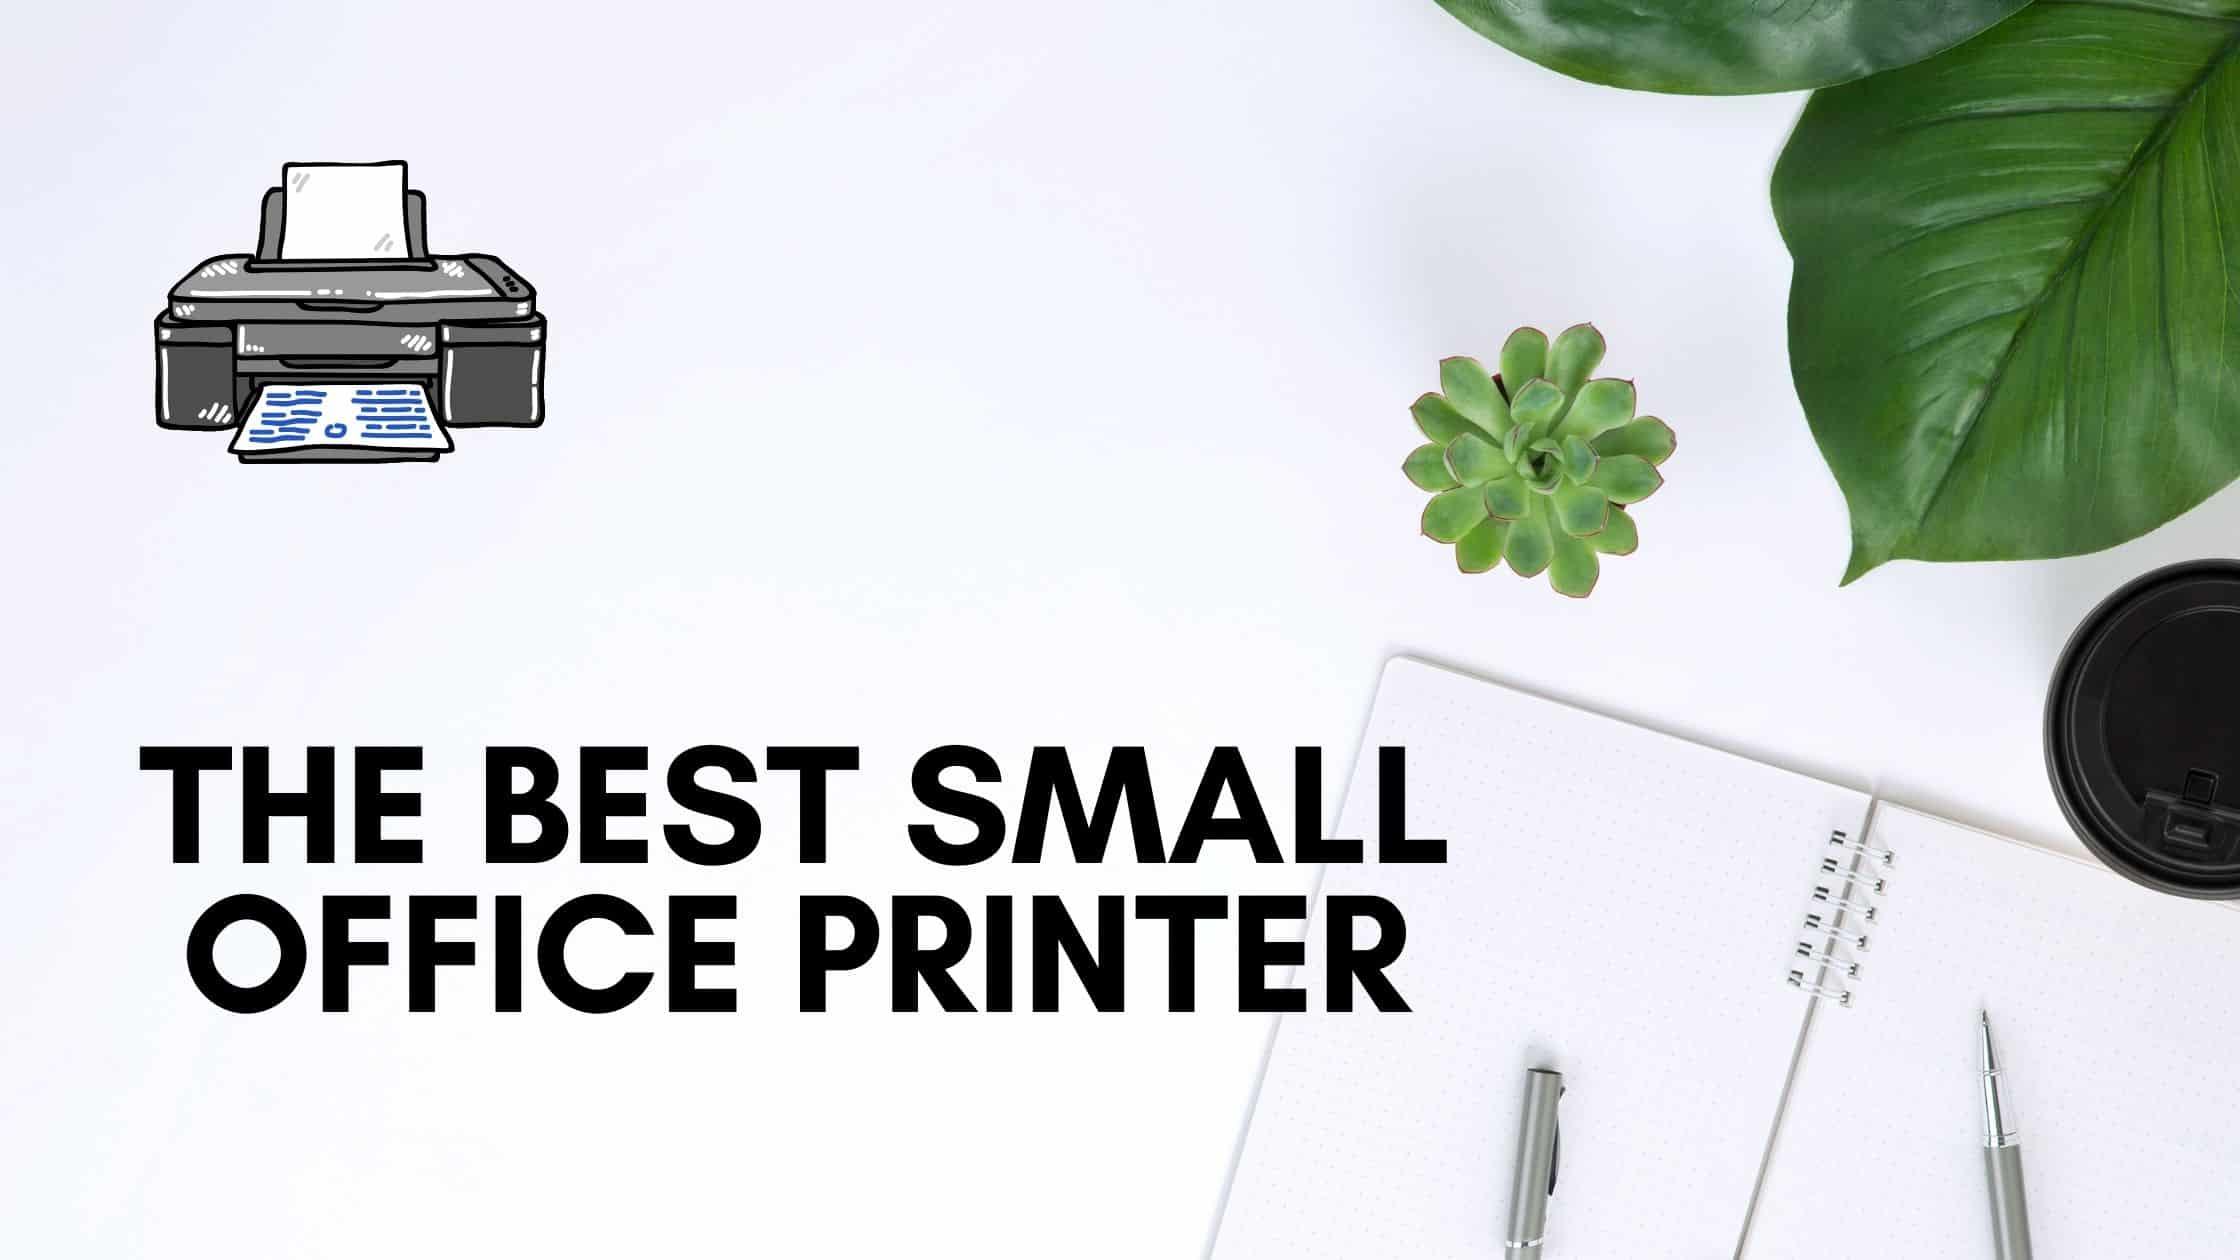 The Best Small Office Printer